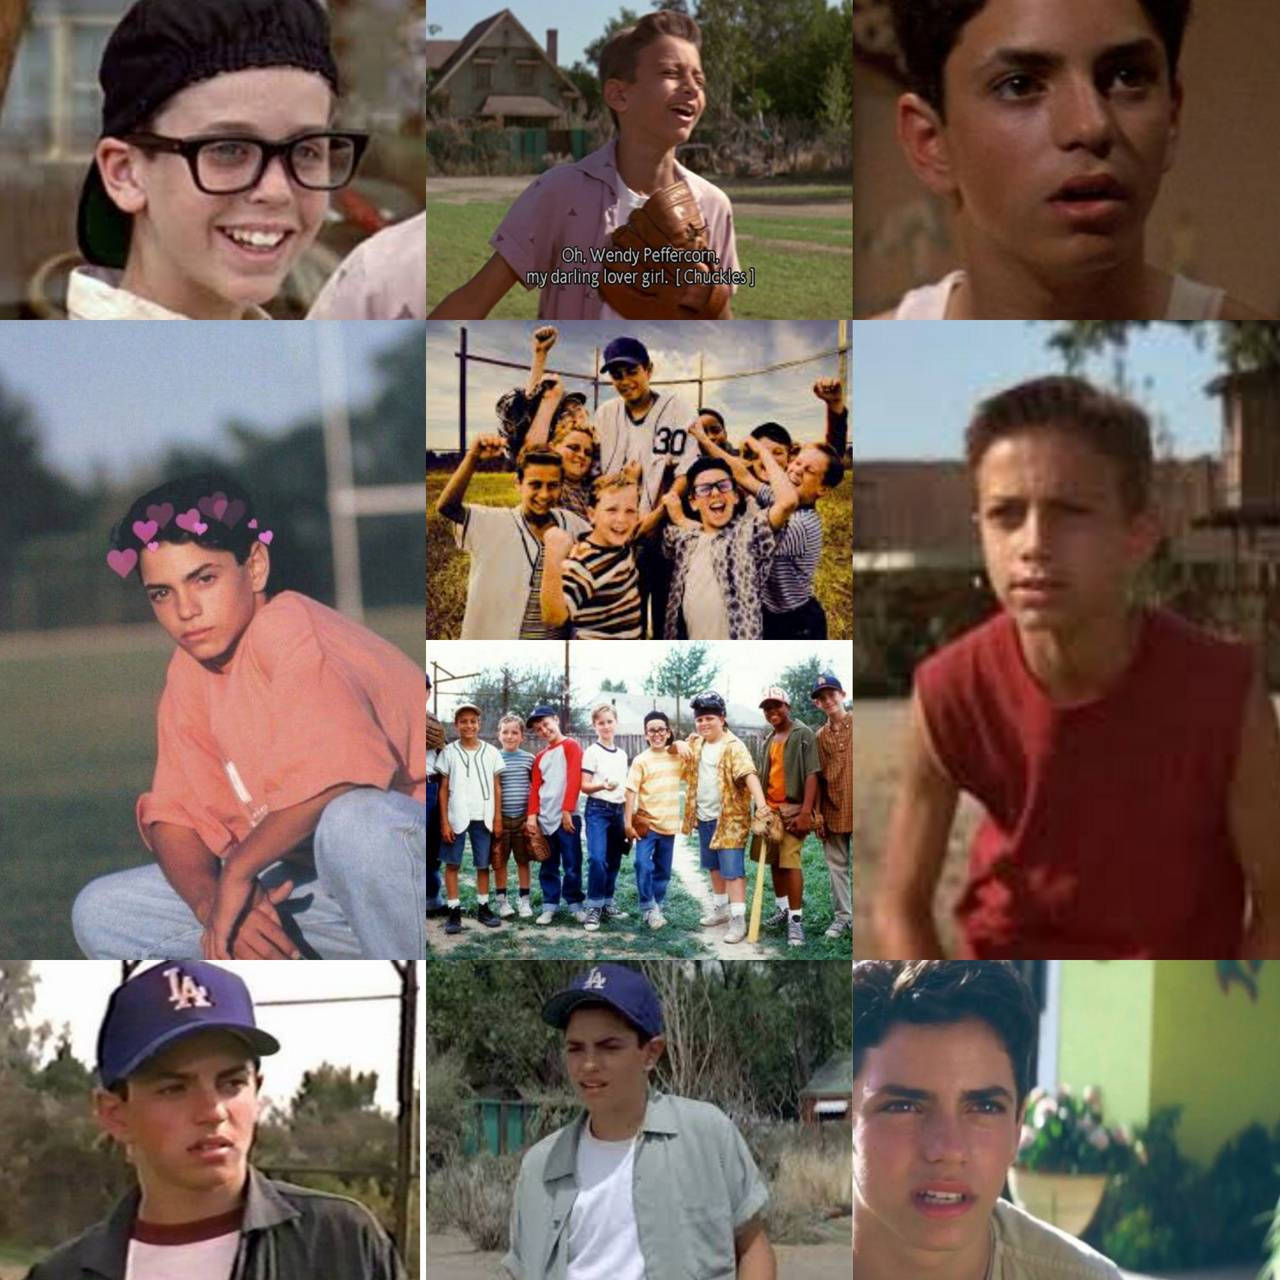 "The Sandlot - Wet and Ready for Fun!" Wallpaper